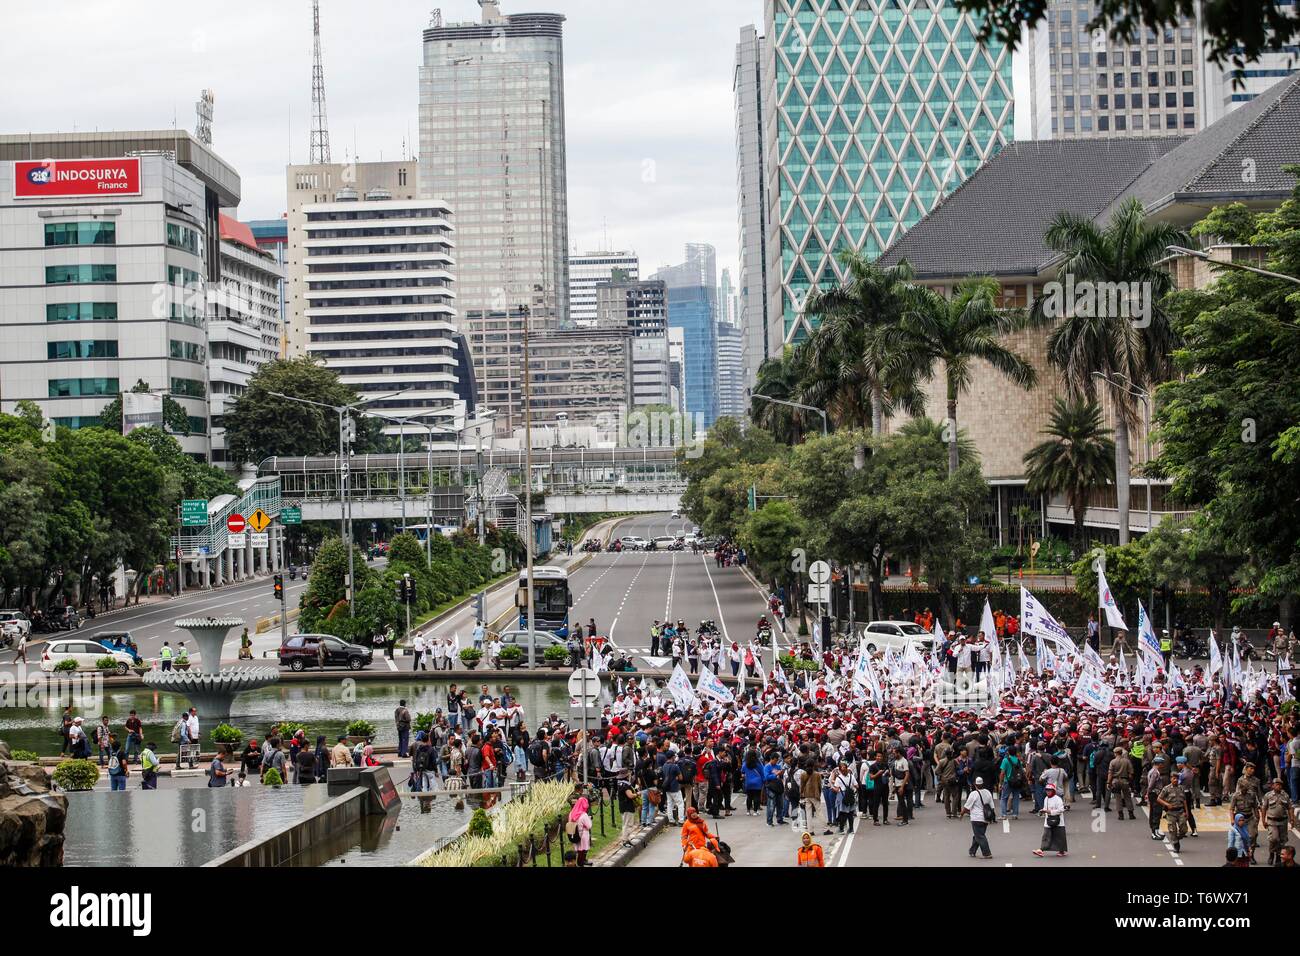 Thousand of labourers seen gathered  during the rally to mark International Workers' Day in Jakarta. Protesters across Indonesia have organized rallies to demand better working conditions. Stock Photo